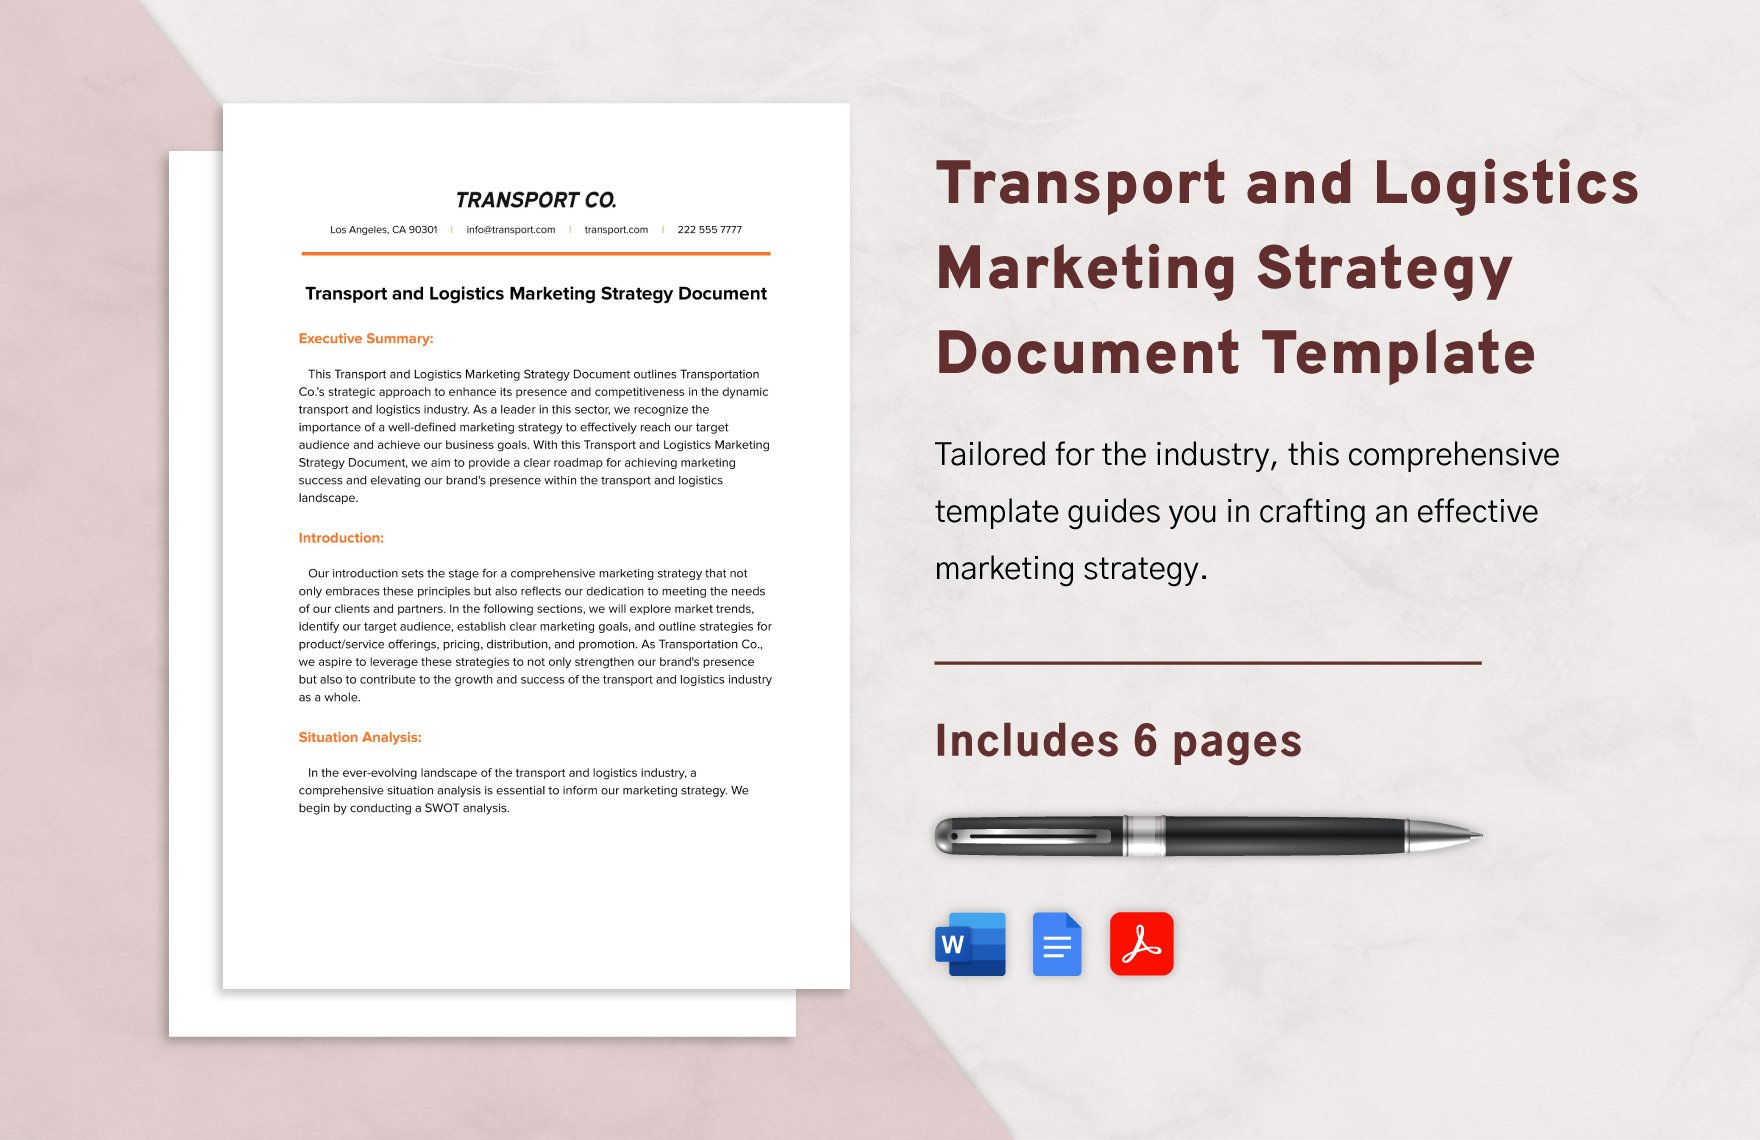 Transport and Logistics Marketing Strategy Document Template in Word, Google Docs, PDF